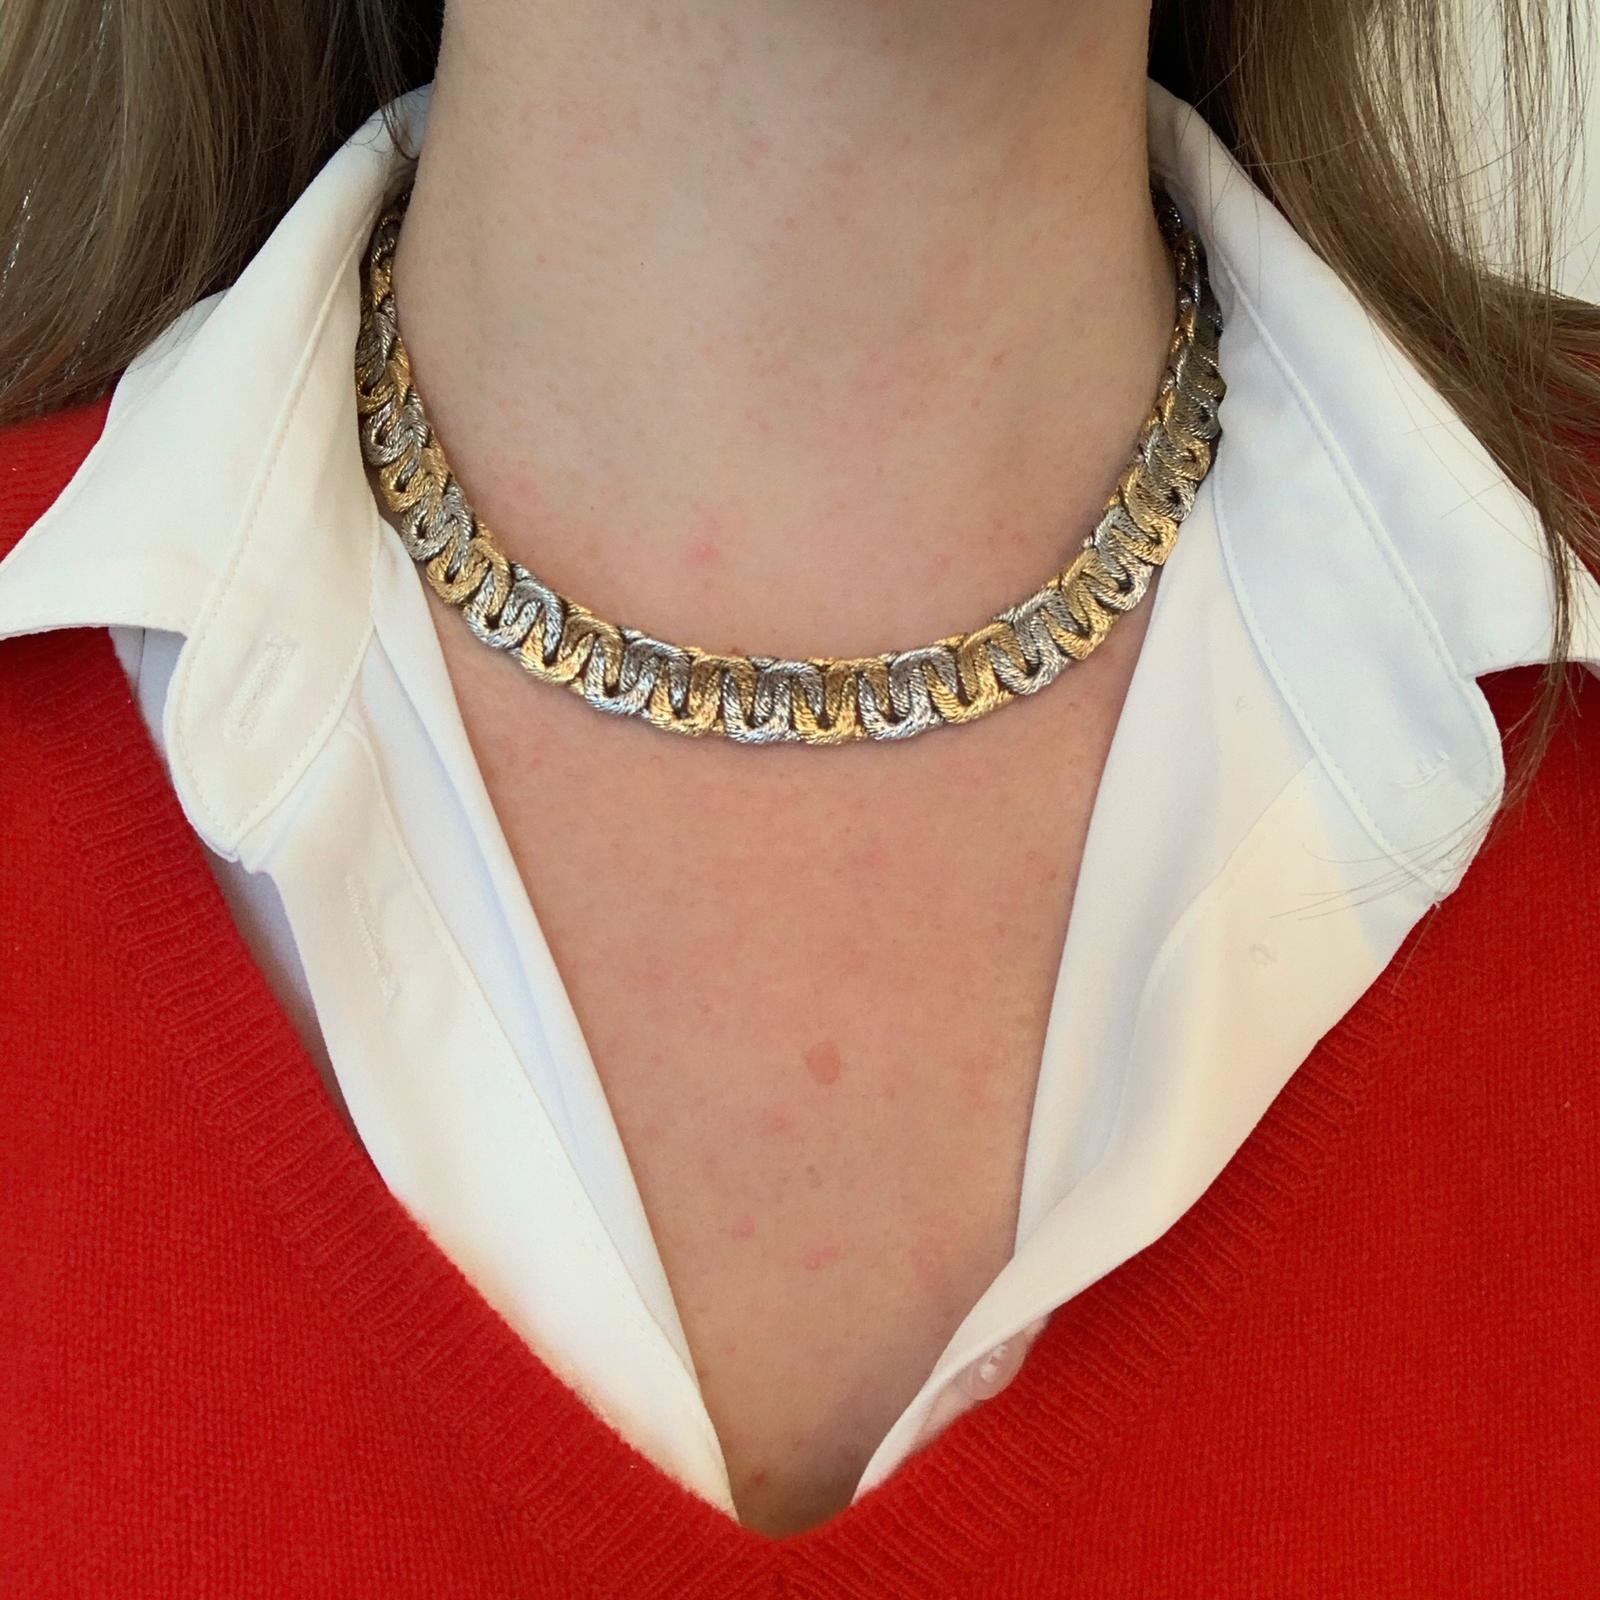 Two Tones Gold Woven Collar Necklace by Georges Lenfant, 18kt gold, France, c1965 4